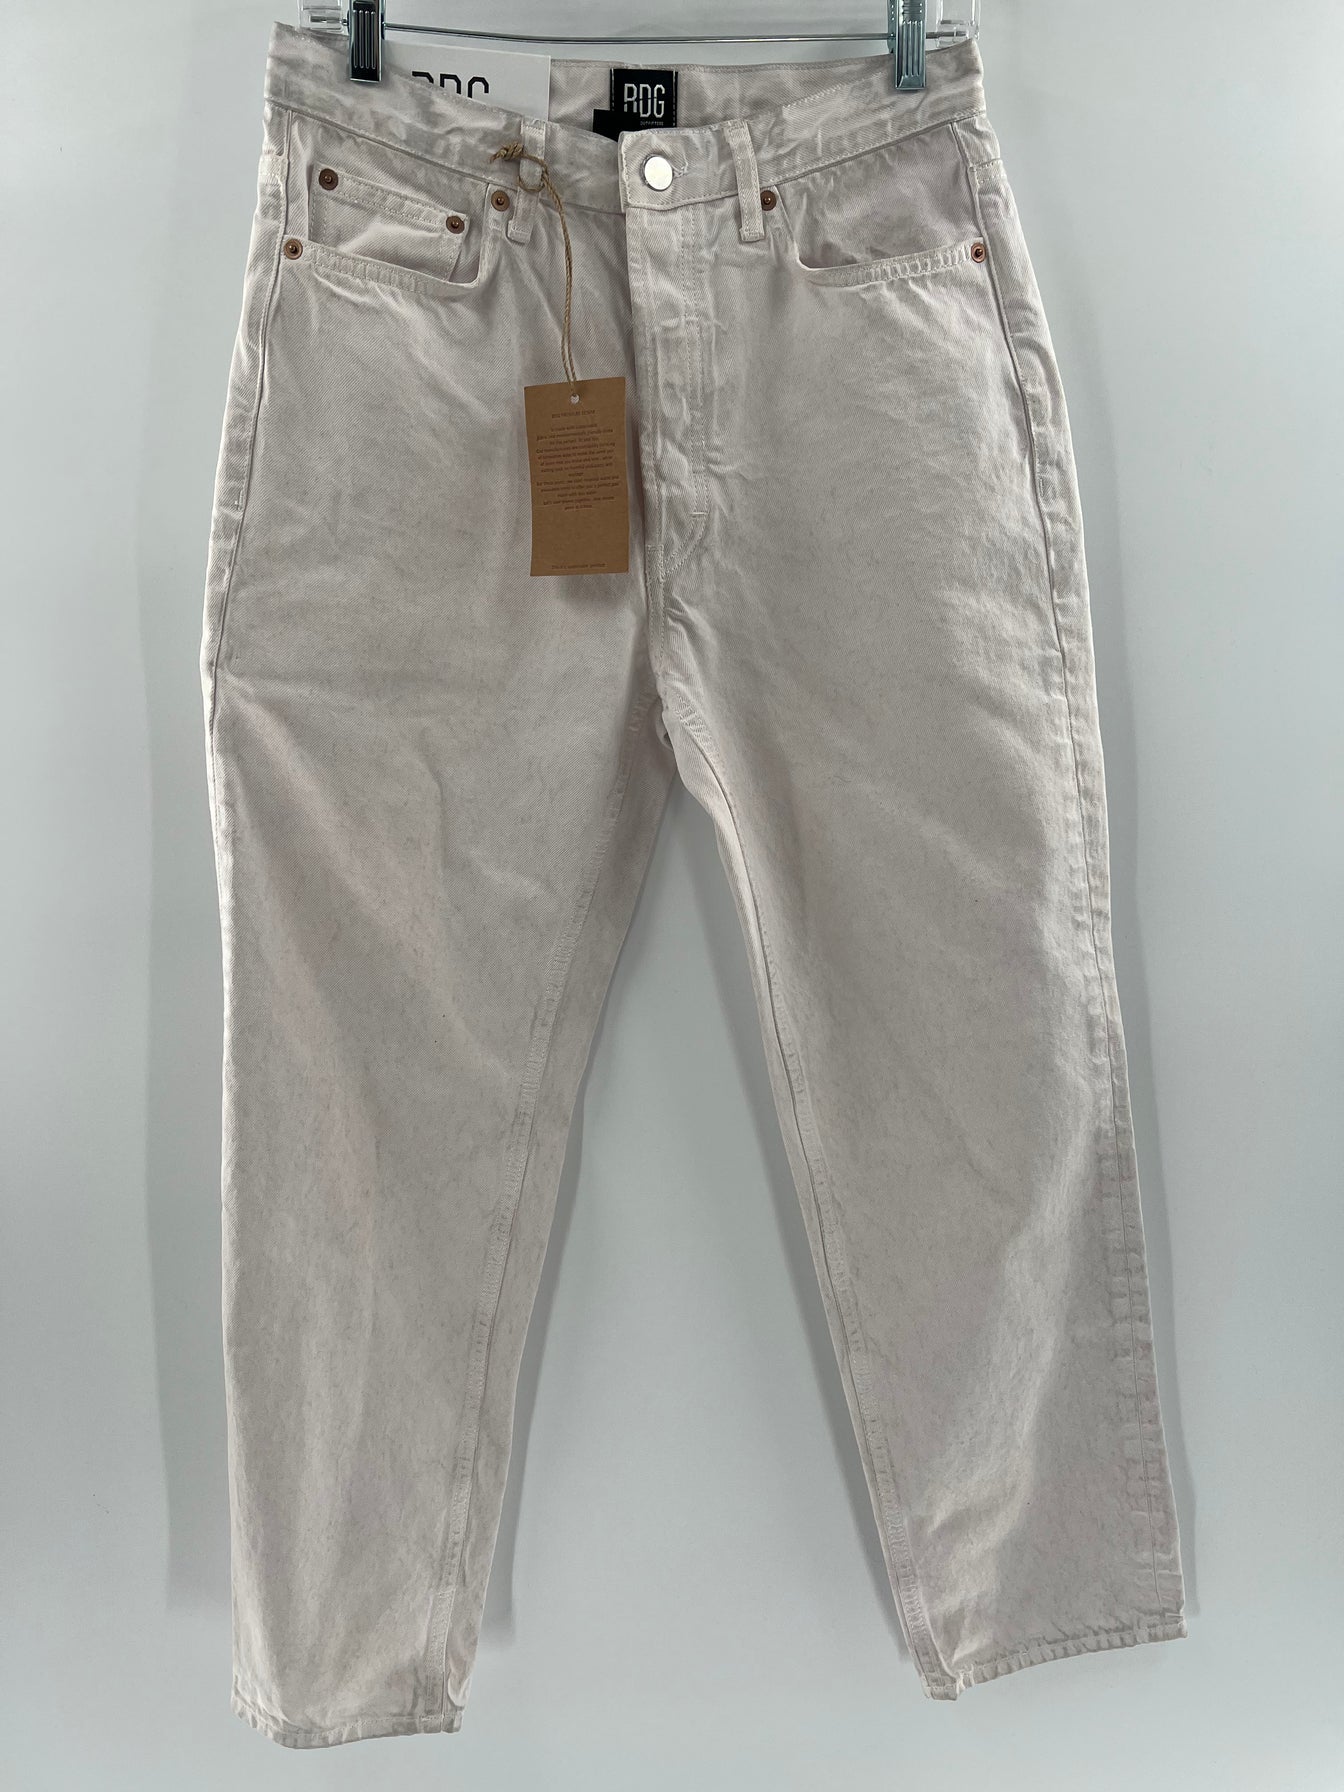 BDG Straight High-Rise White/Off-White Button Up Jeans (size 28)